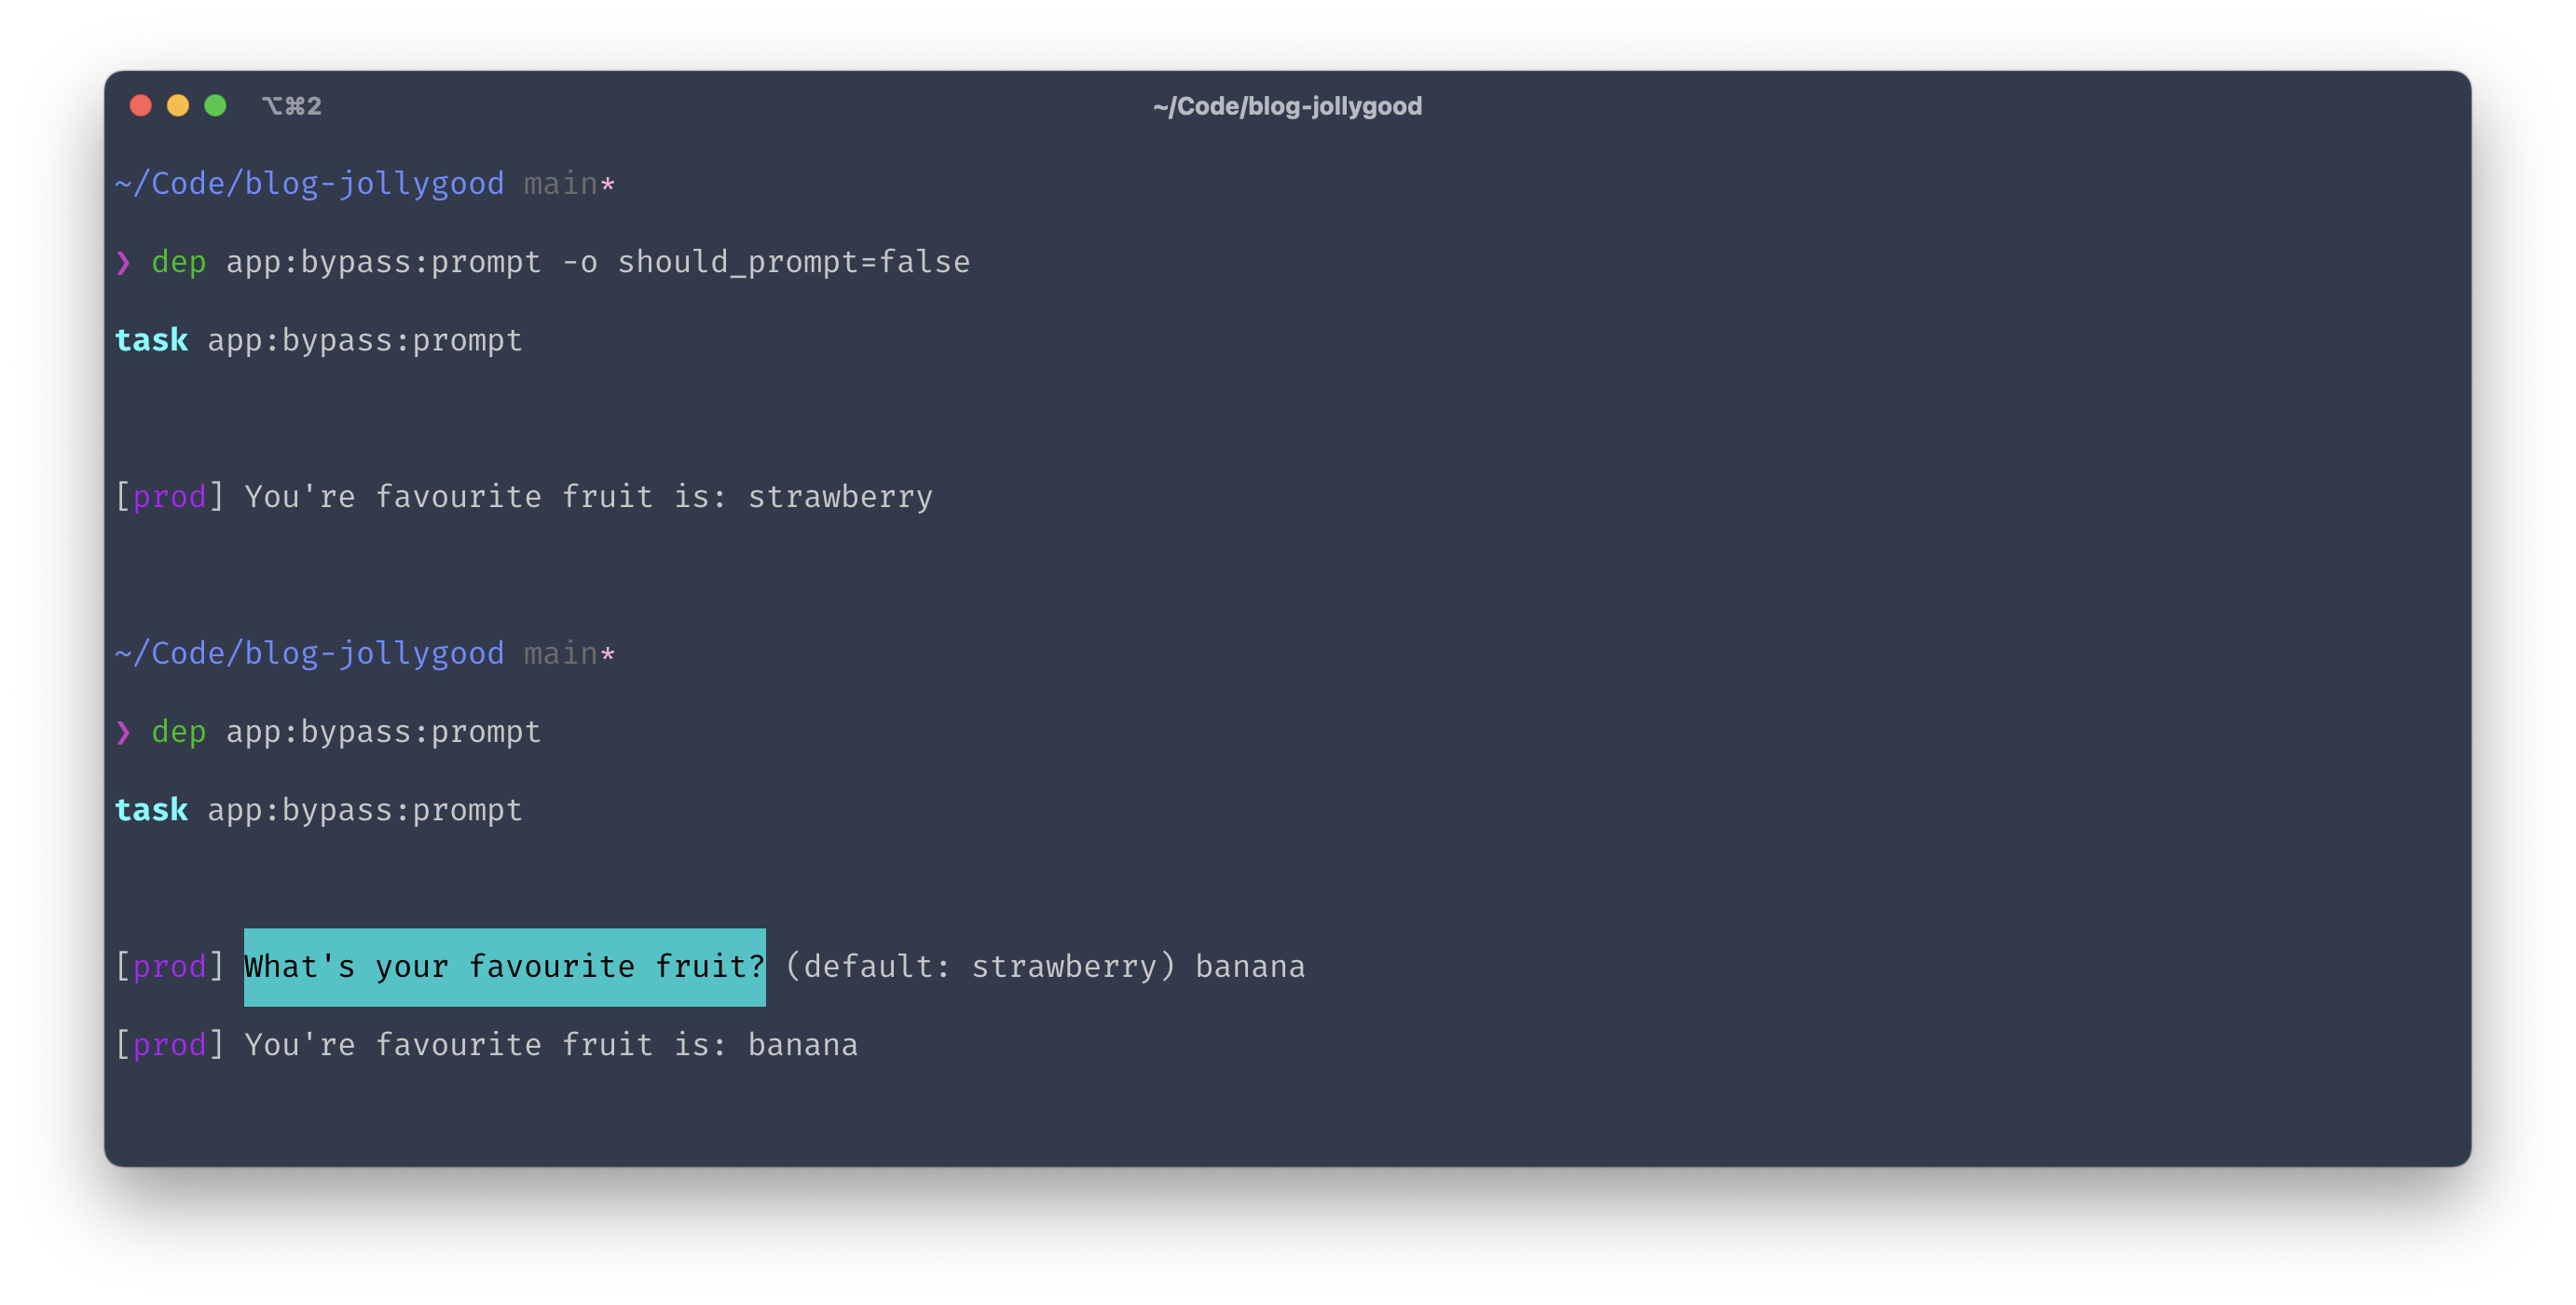 Screenshot of the terminal output for "dep app:bypass:prompt -o should_prompt=false" and then "dep app:bypass:prompt" without the option. The former simply displays "Your favourite fruit is: strawberry" whereas the latter asks for the favourite fruit first.